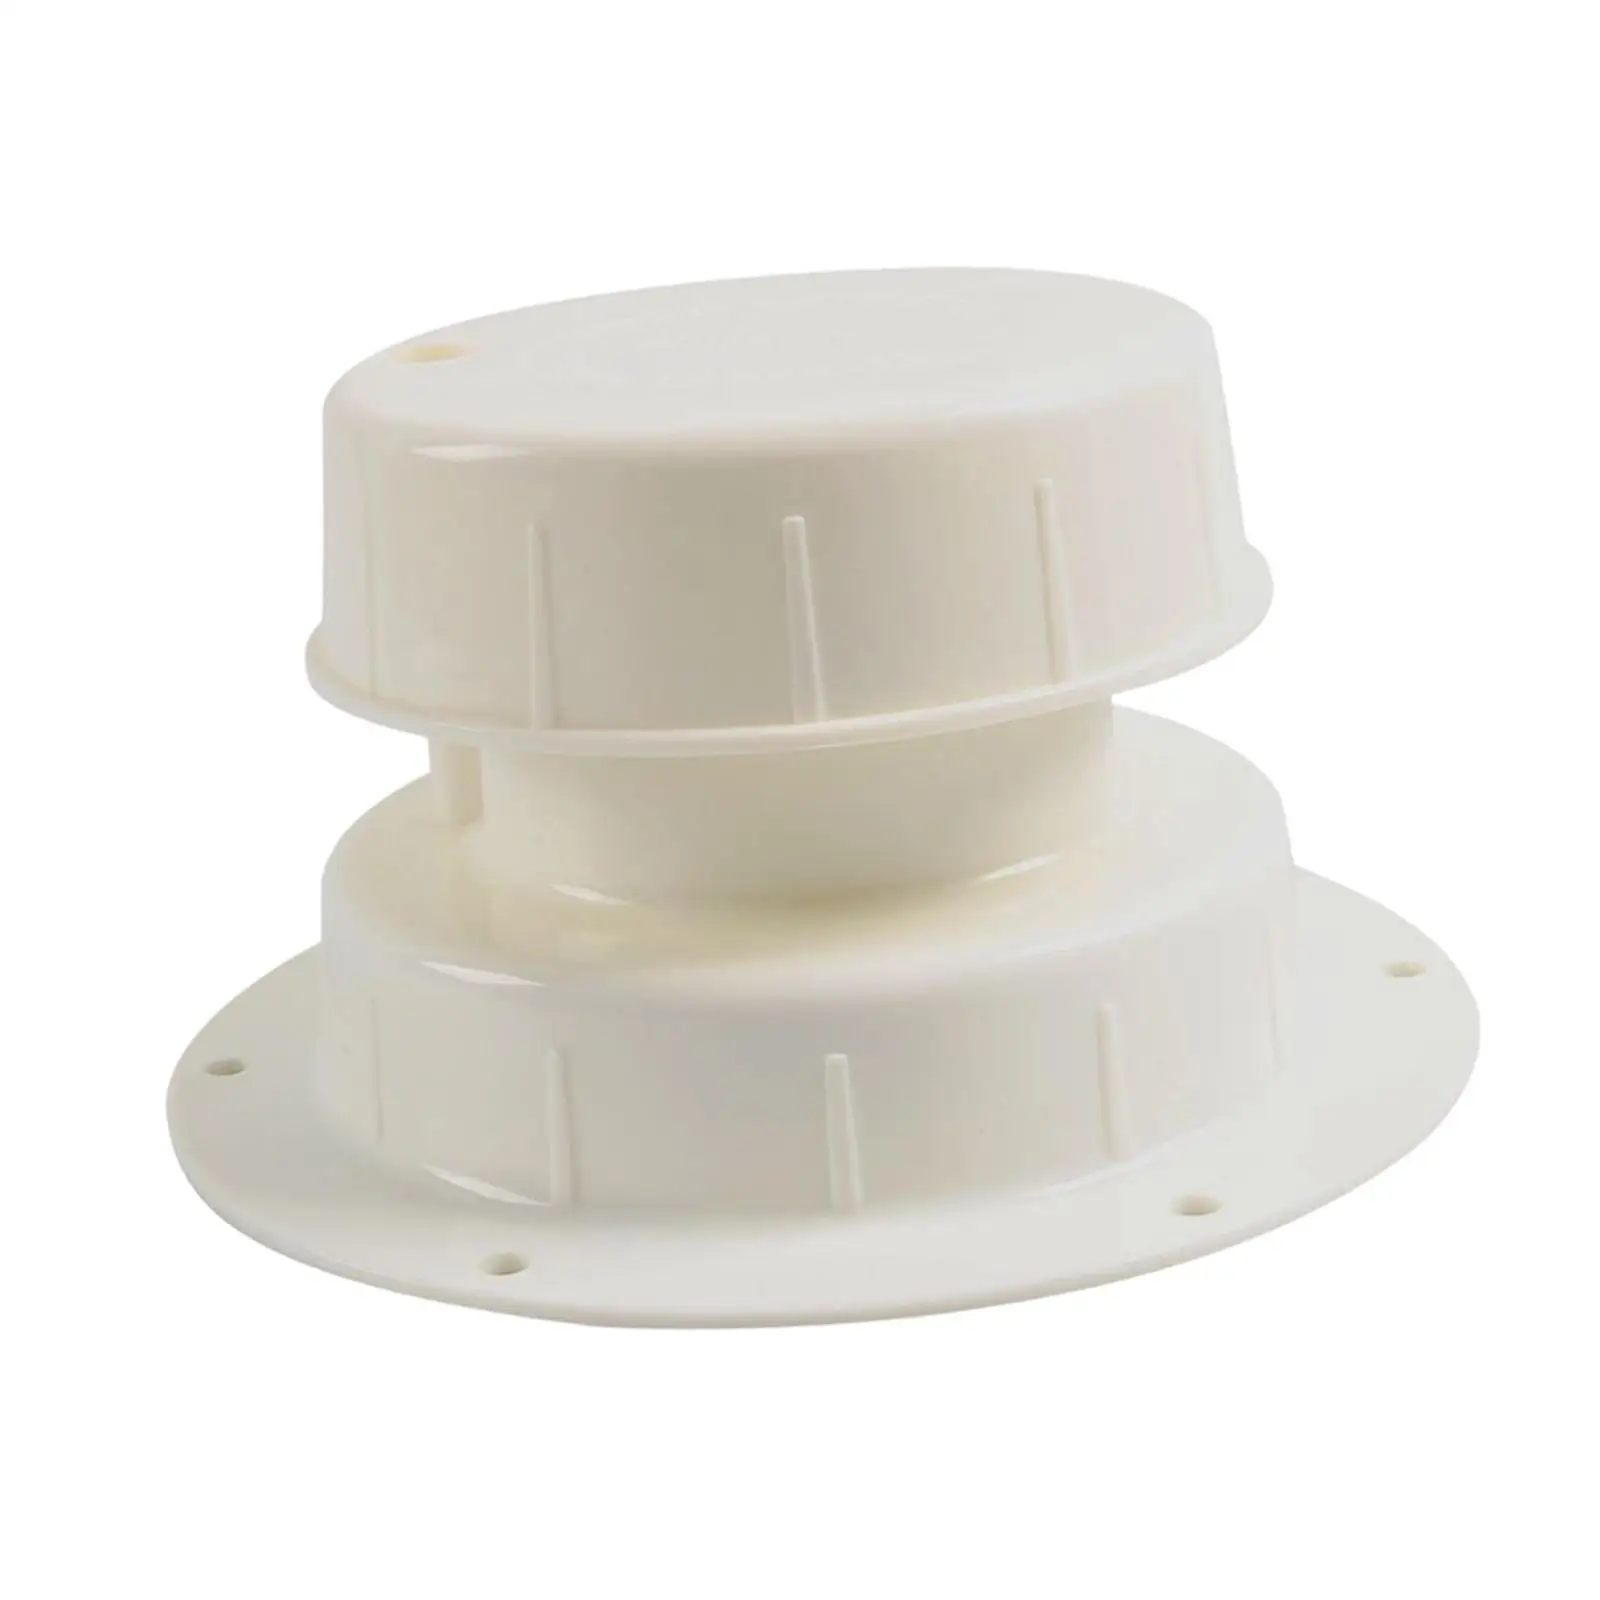 RV Plumbing Vent Cap Roof Vent Cover for 1 to 2 3/8 inch